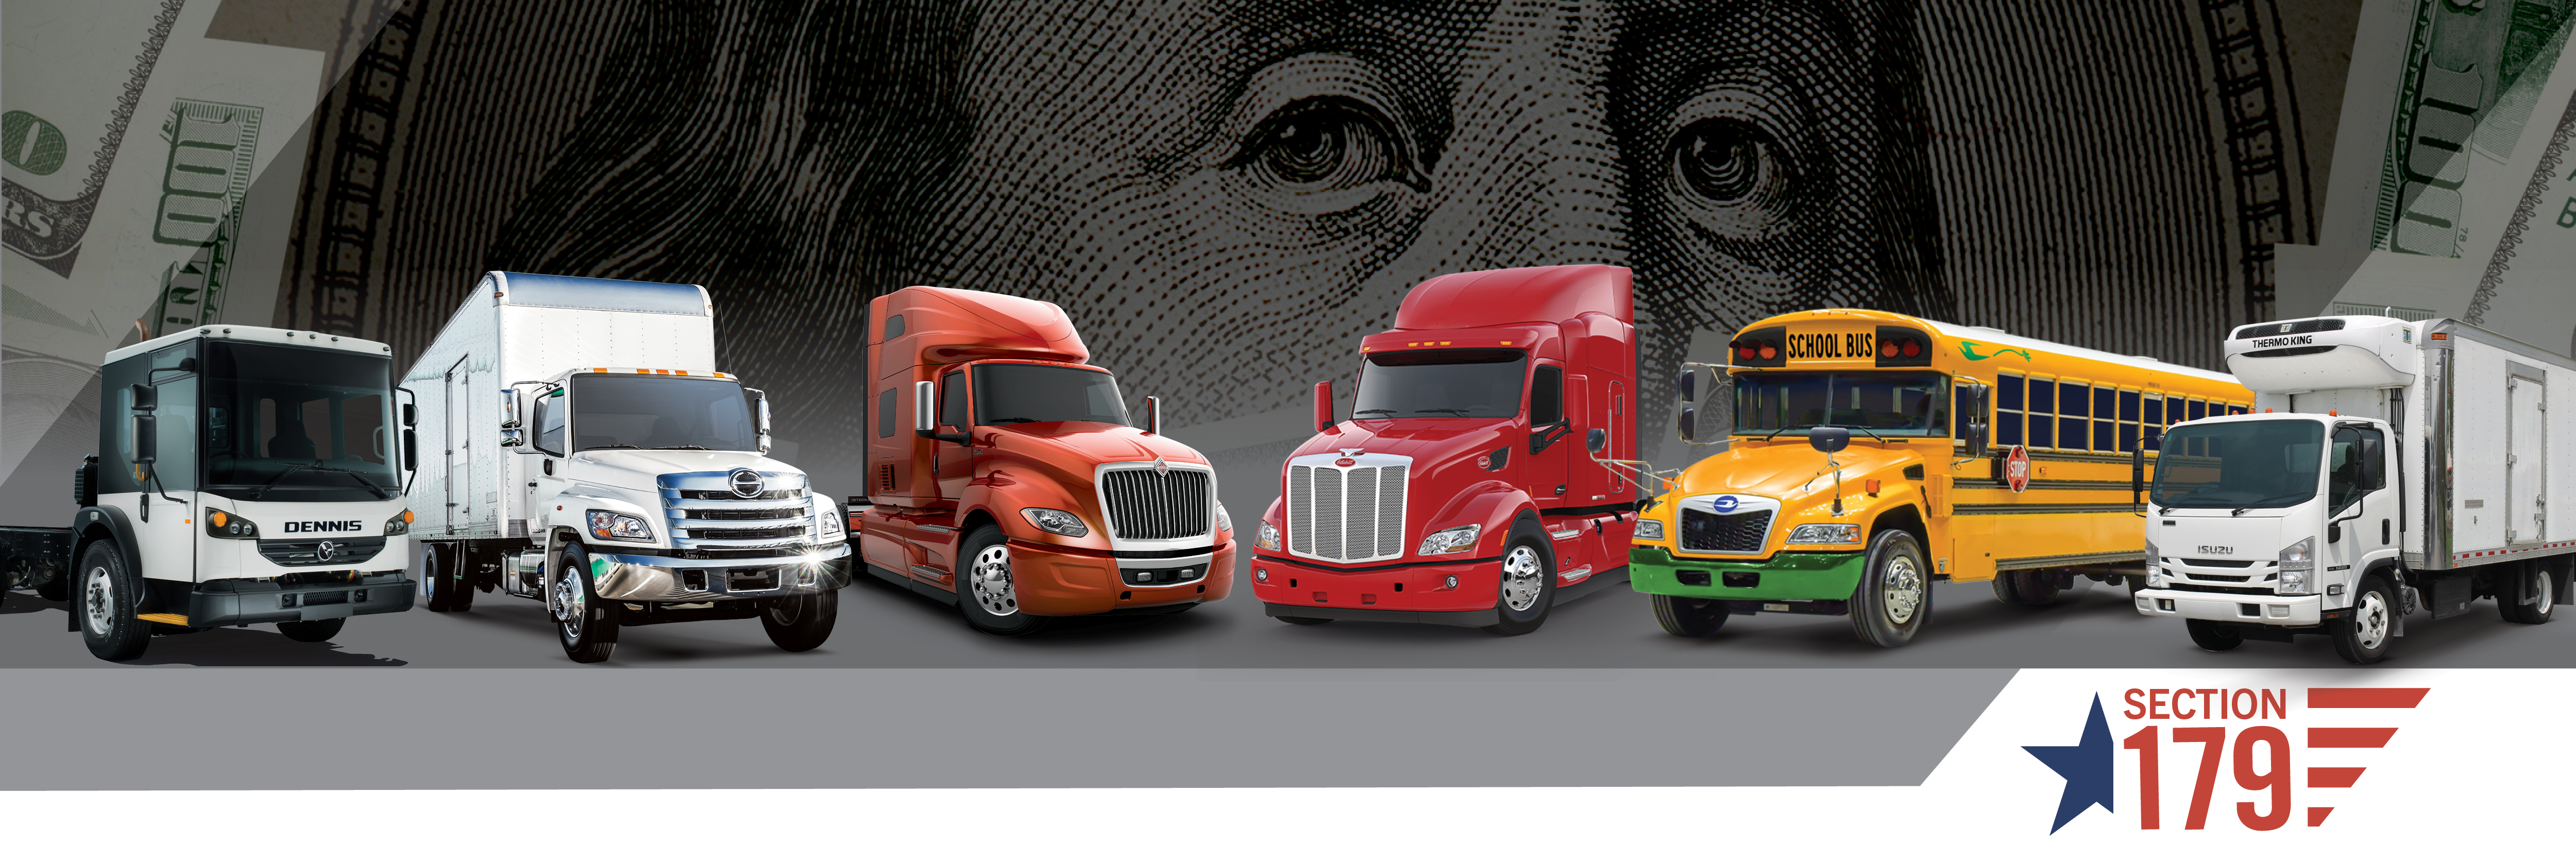 Line up of trucks and buses on top of dollar bill background with Section 179 logo